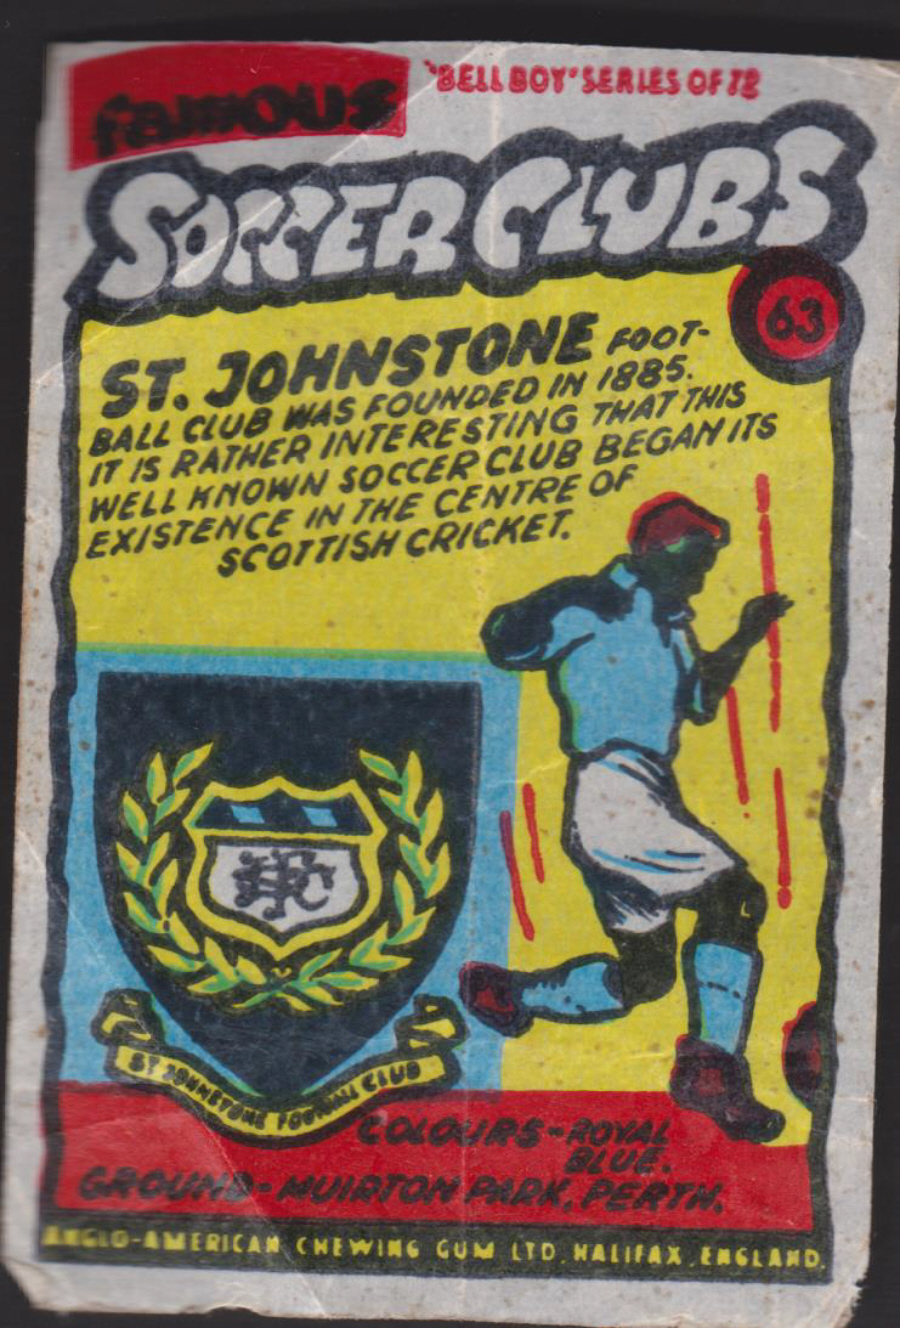 Anglo-American-Chewing-Gum-Wax-Wrapper-Famous-Soccer-Clubs-No-63 -St.Johnstone - Click Image to Close